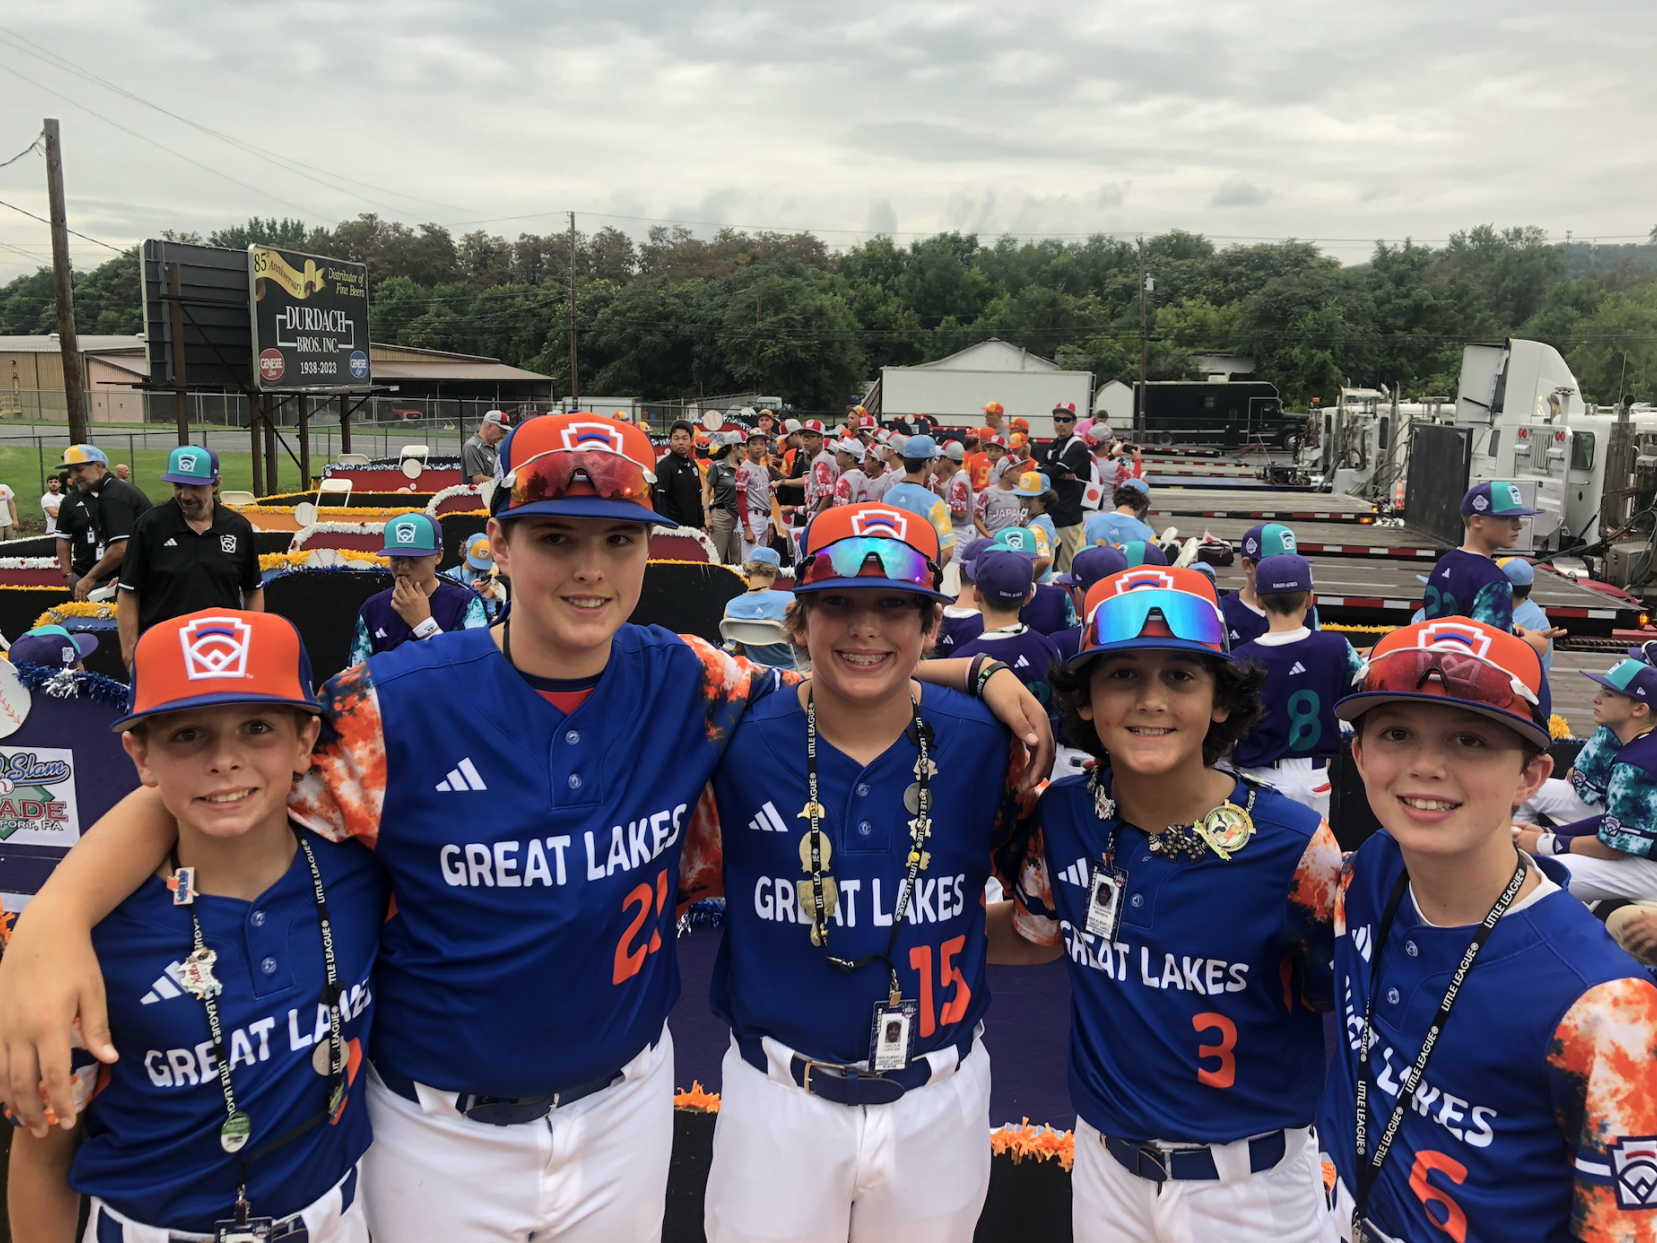 New Albany loses 4-3 in rain-shortened game at Little League World